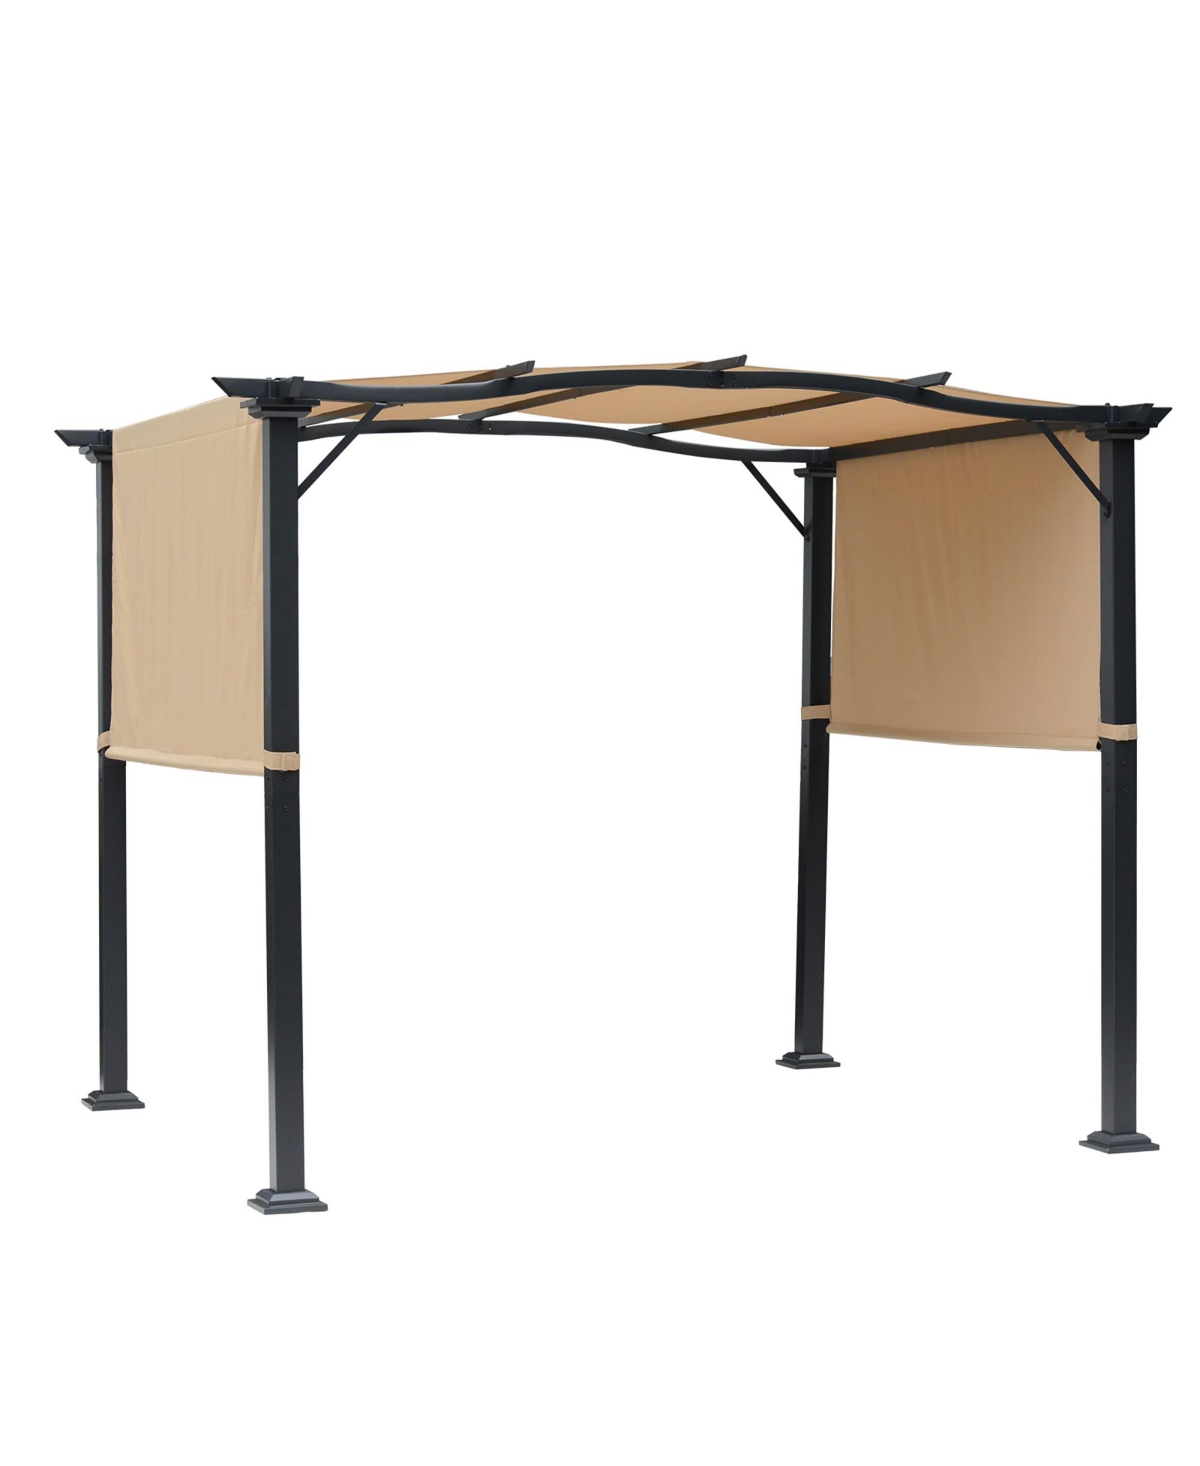 8' x 10' Retractable Pergola Canopy Steel Frame Polyester Fabric Gazebo with Retractable Canopy Shade Awning - Beige